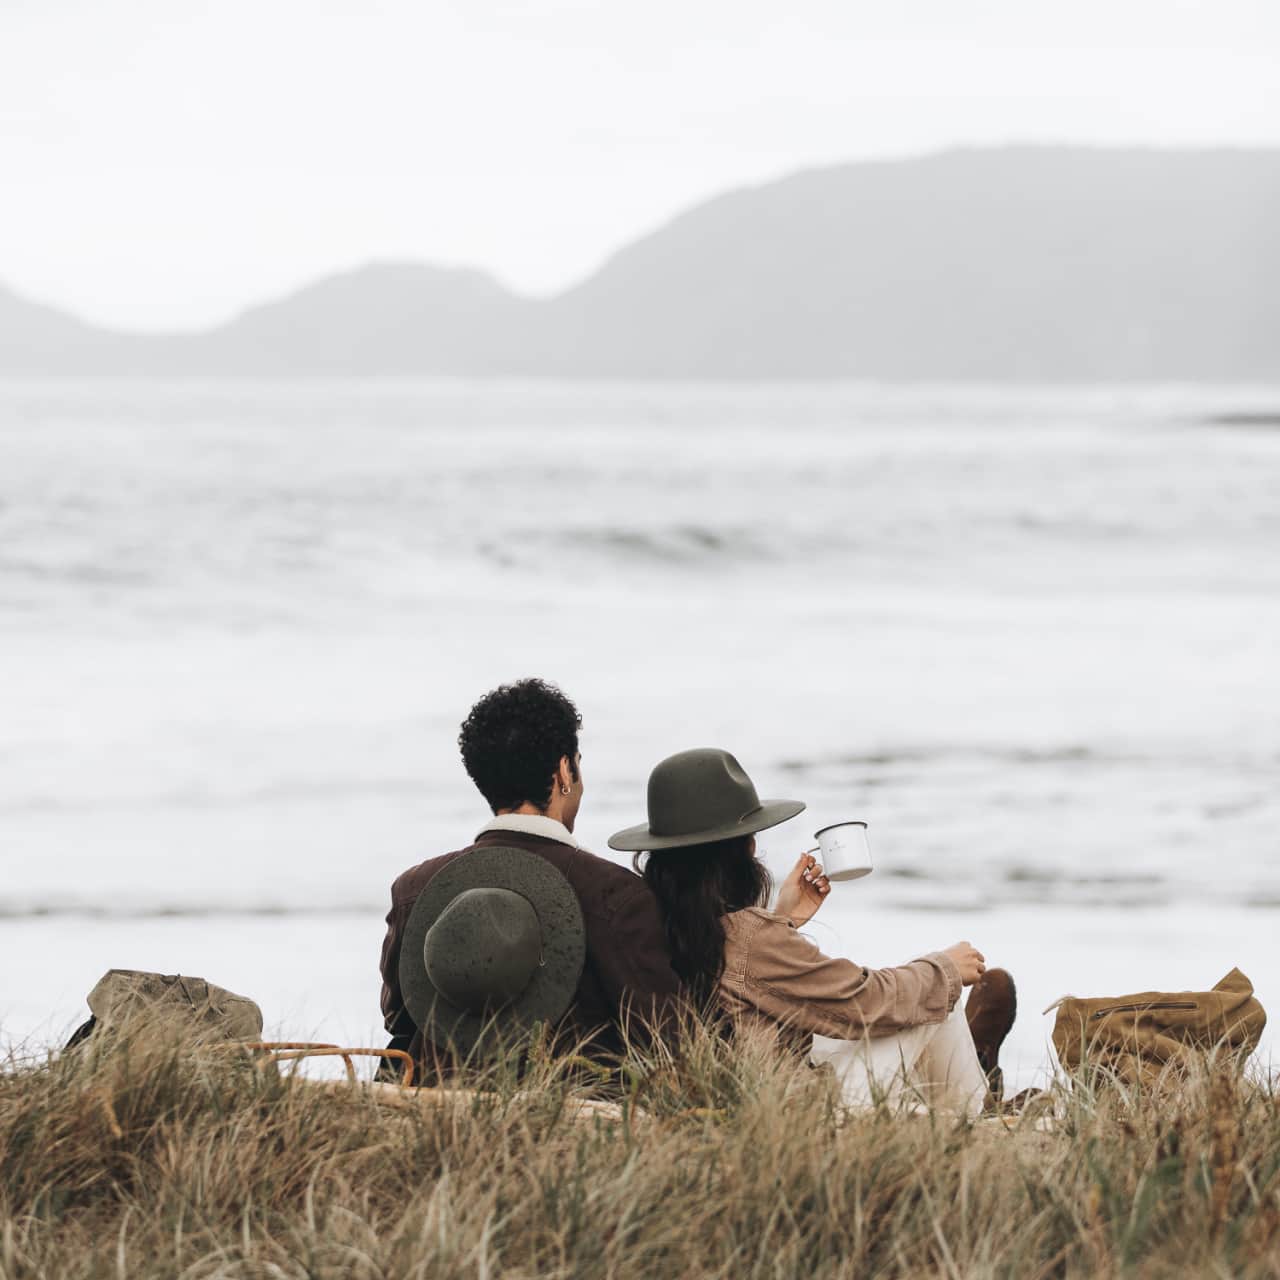 A man and a woman are having a picnic on top of a cliff overlooking the ocean